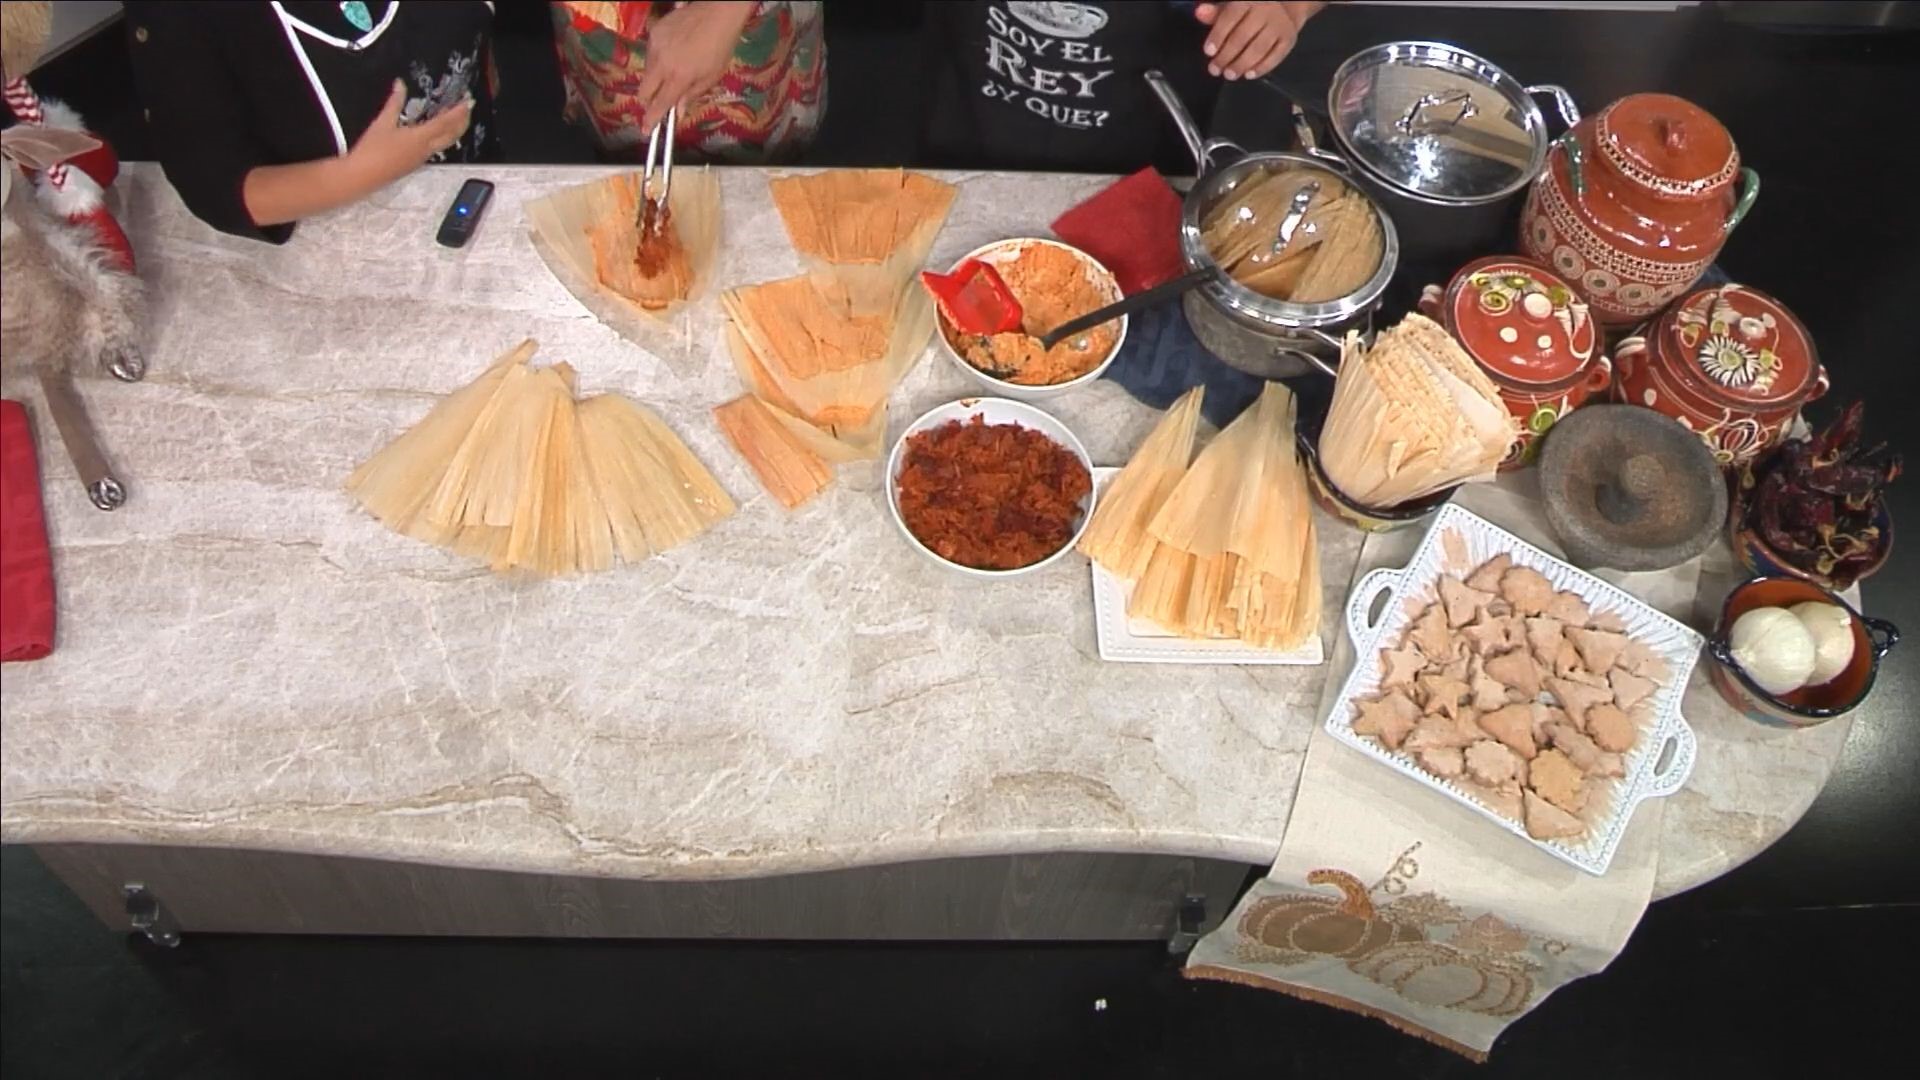 Community leader and actress Yolanda Ortega shares how tamales became a Christmas tradition within the Hispanic community, and shows us how they are made.